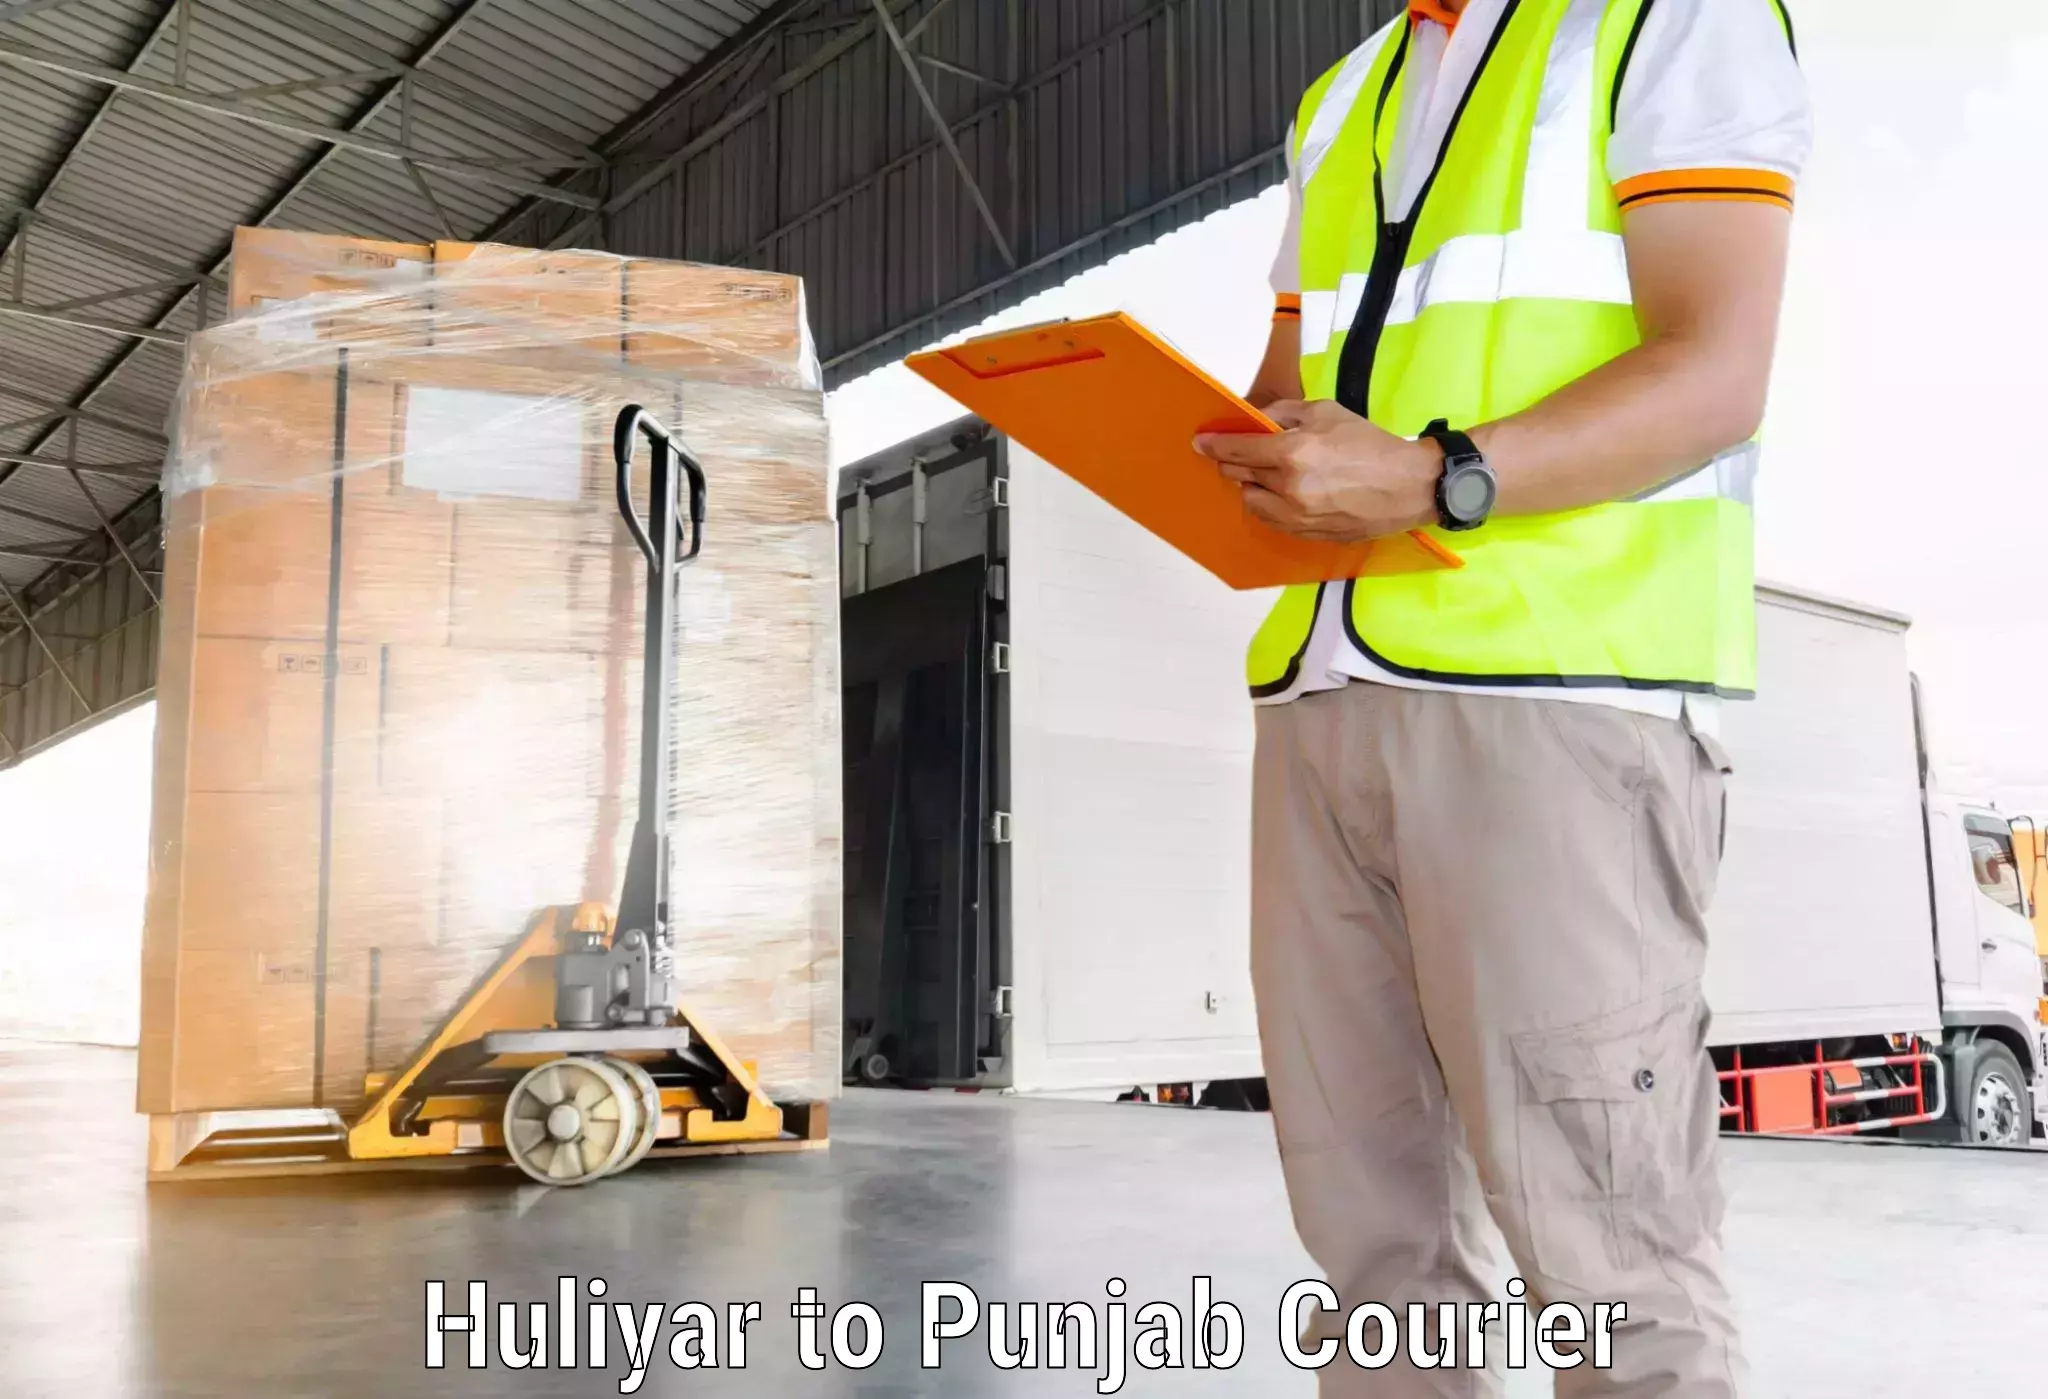 Tech-enabled shipping in Huliyar to Mohali